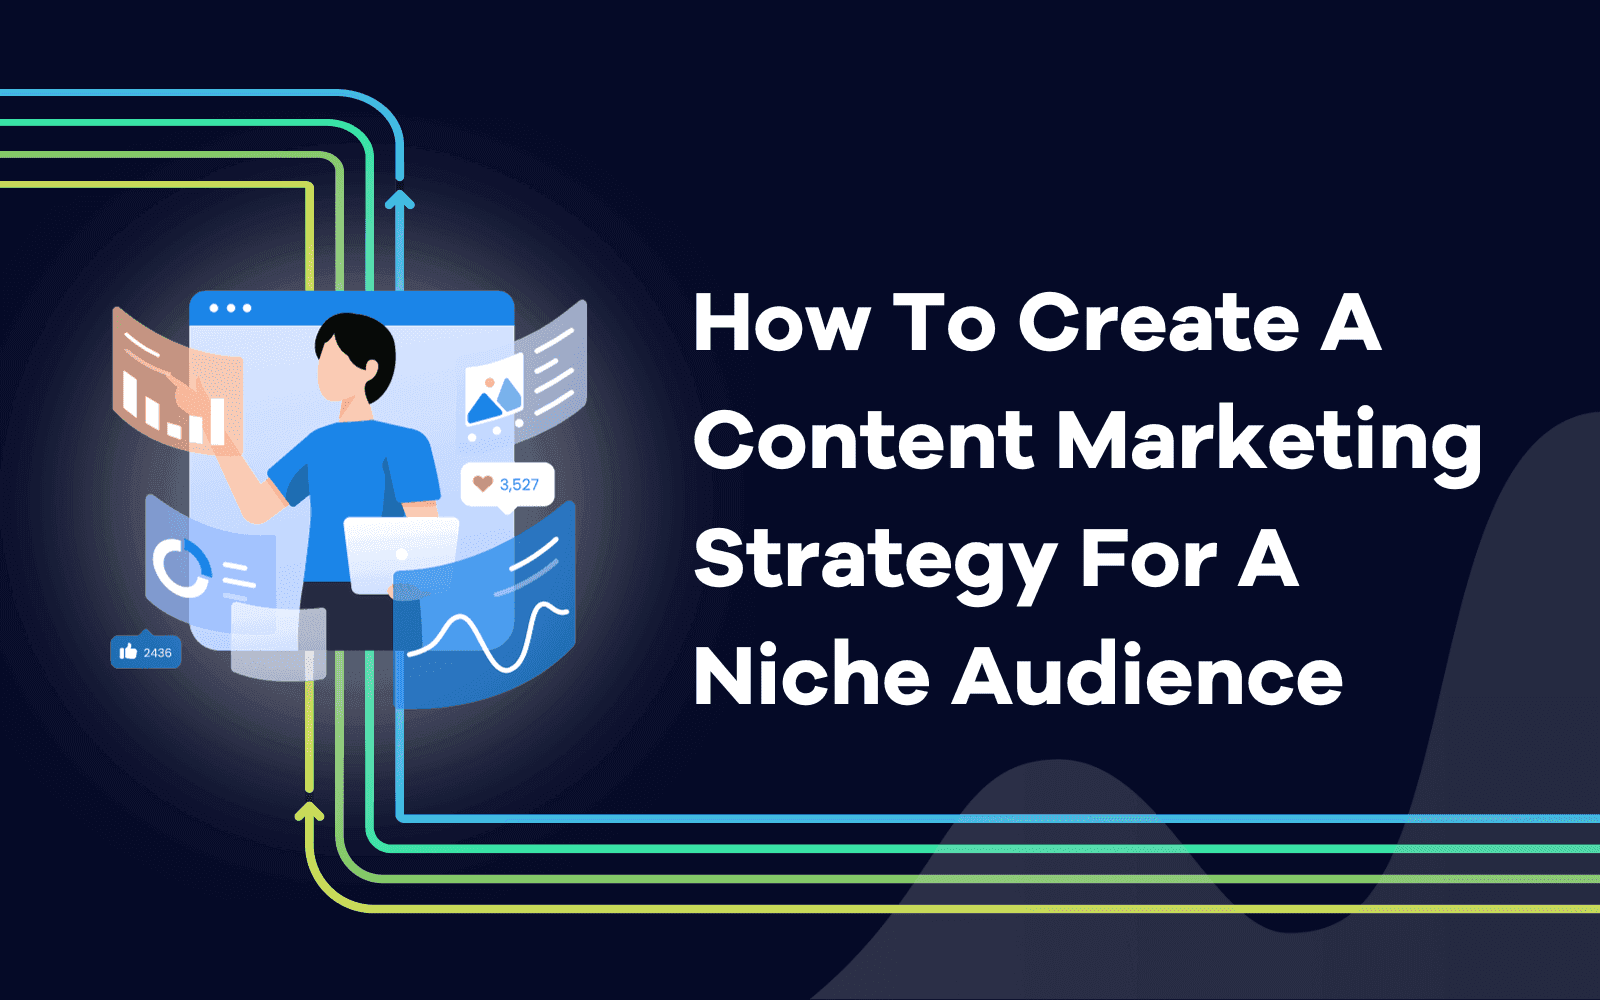 How To Create A Content Marketing Strategy For A Niche Audience